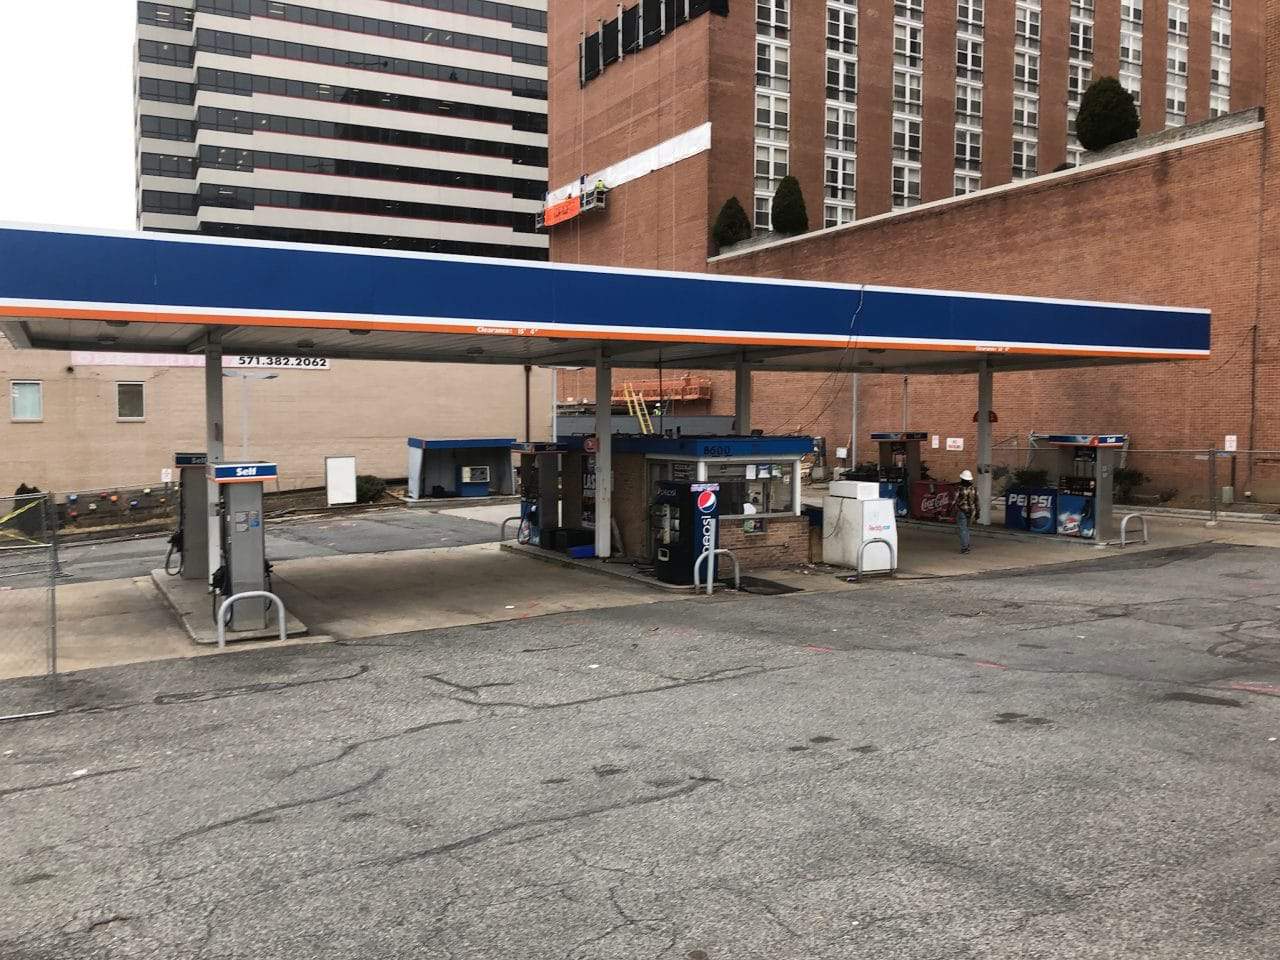 Gas station closes to prepare for hotel construction